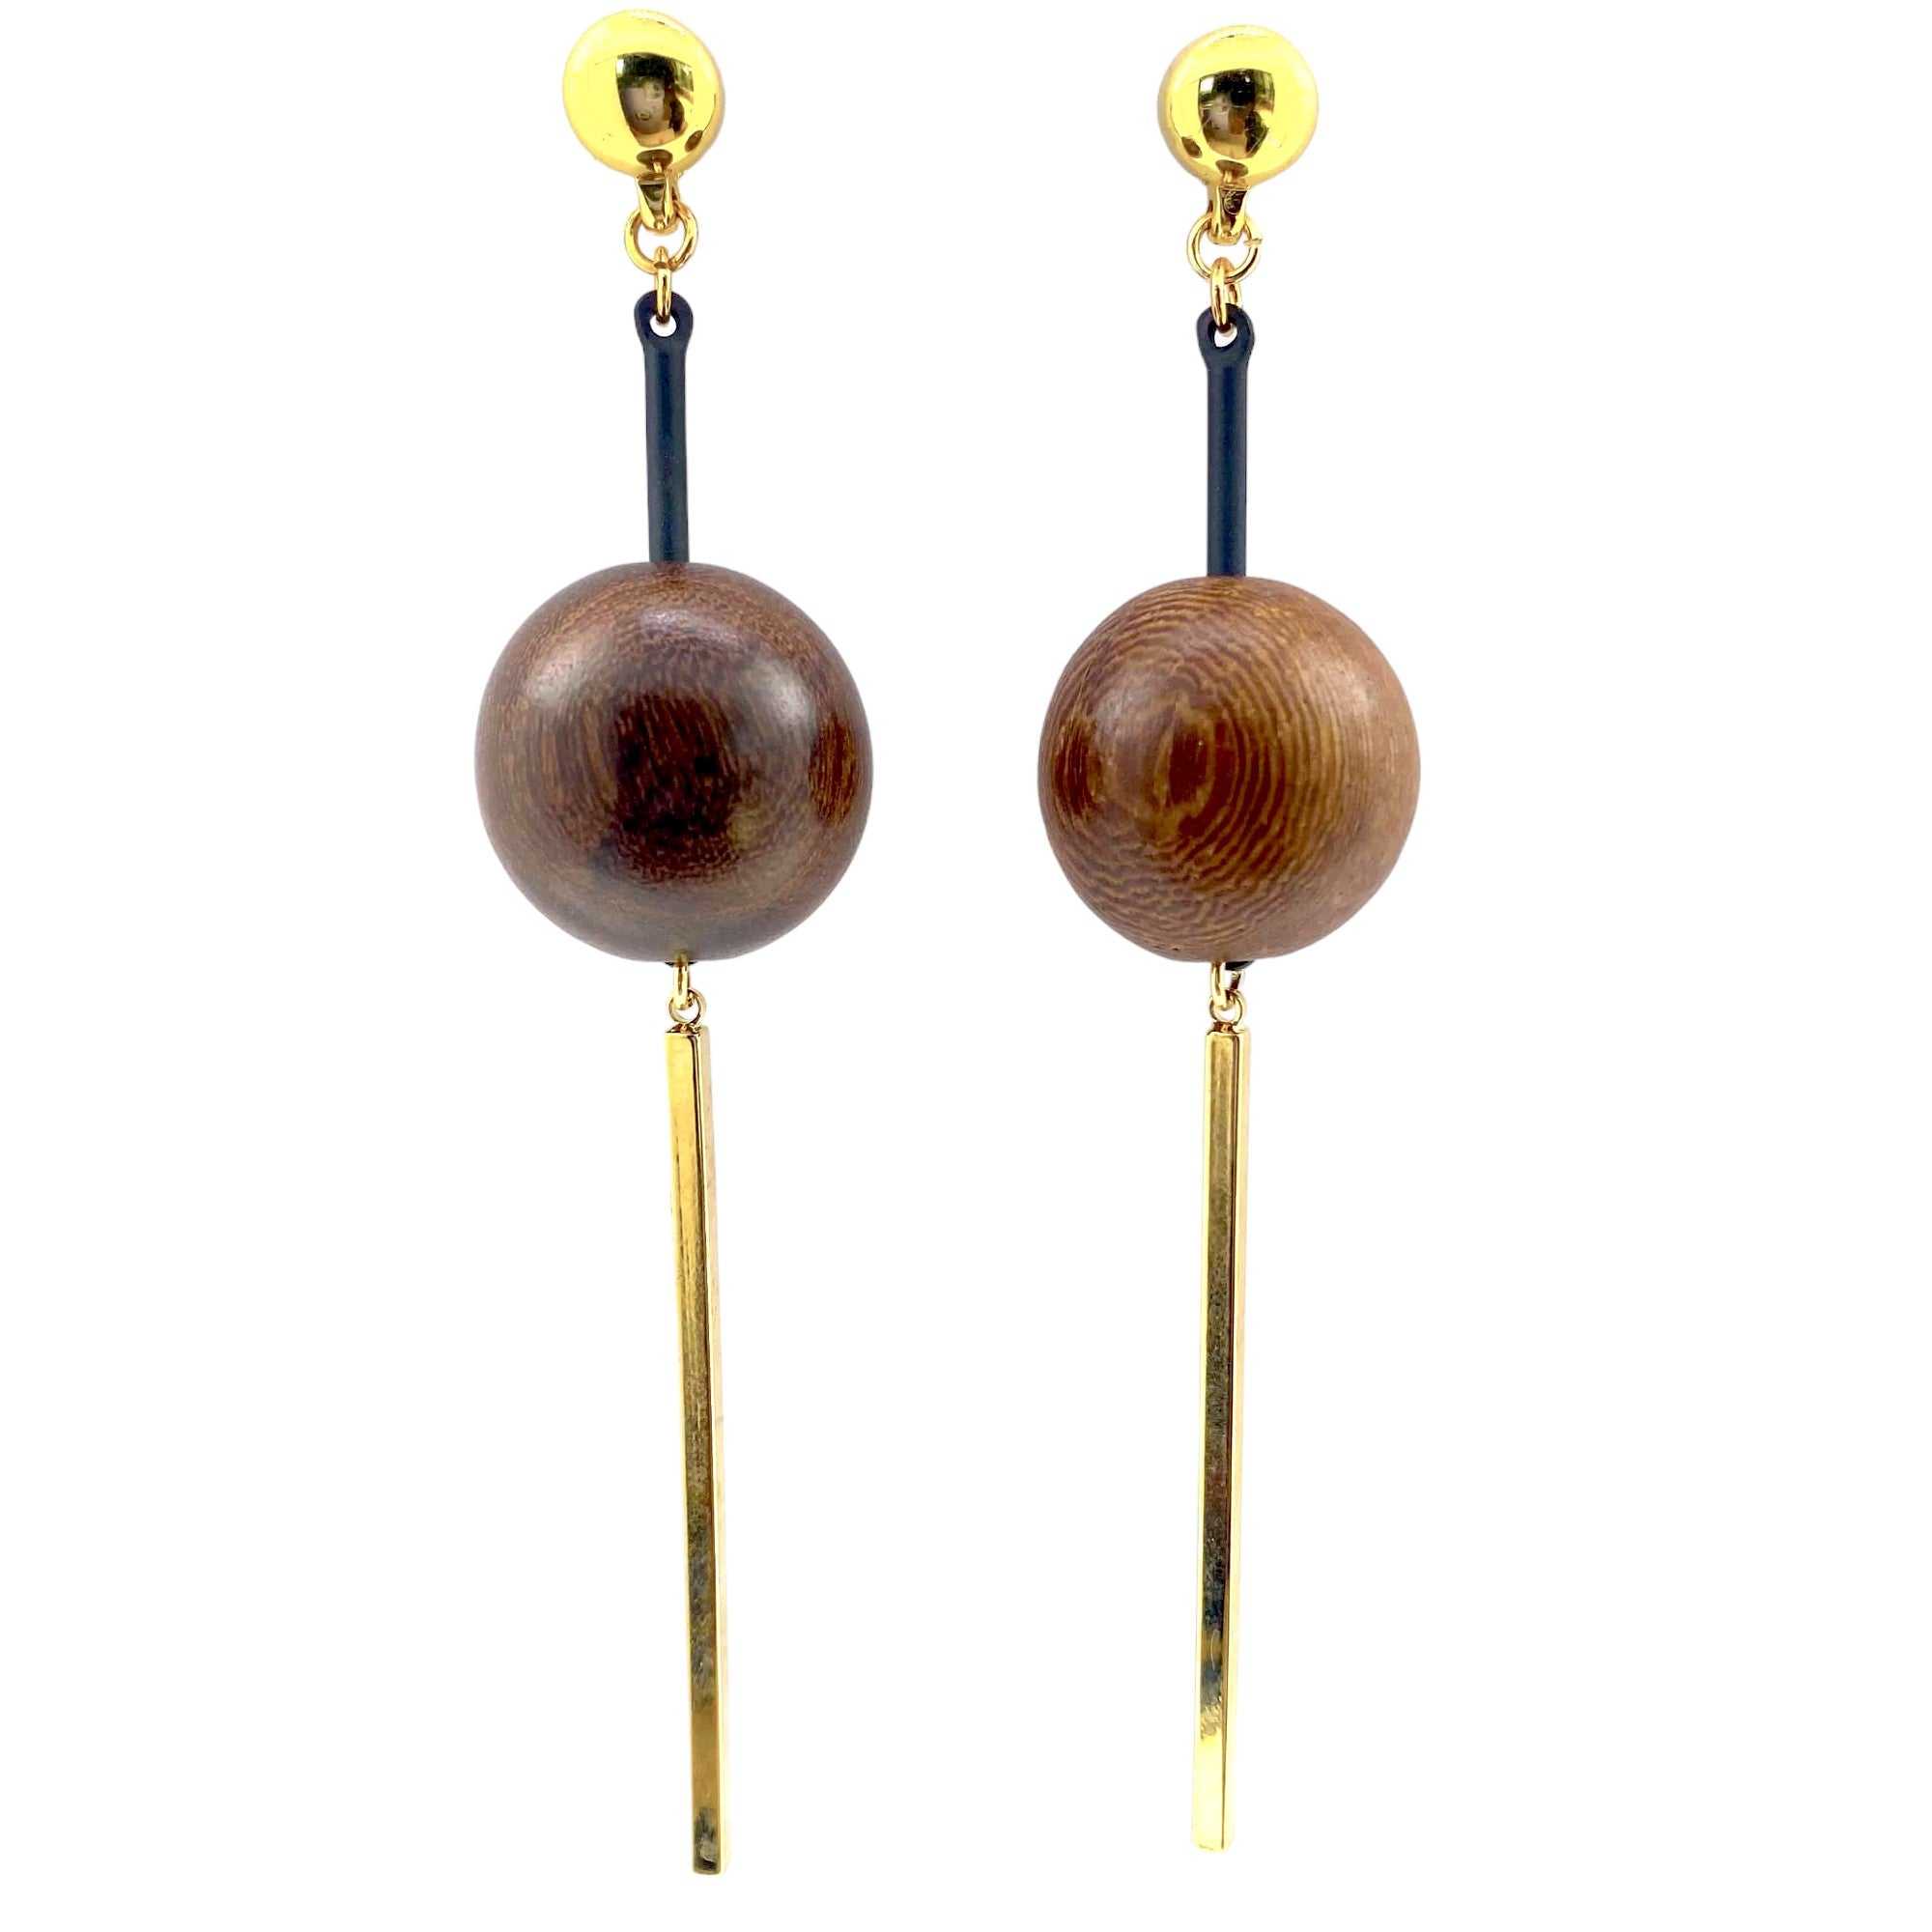 TI-GO Brown wooden ball and hanging golden bar